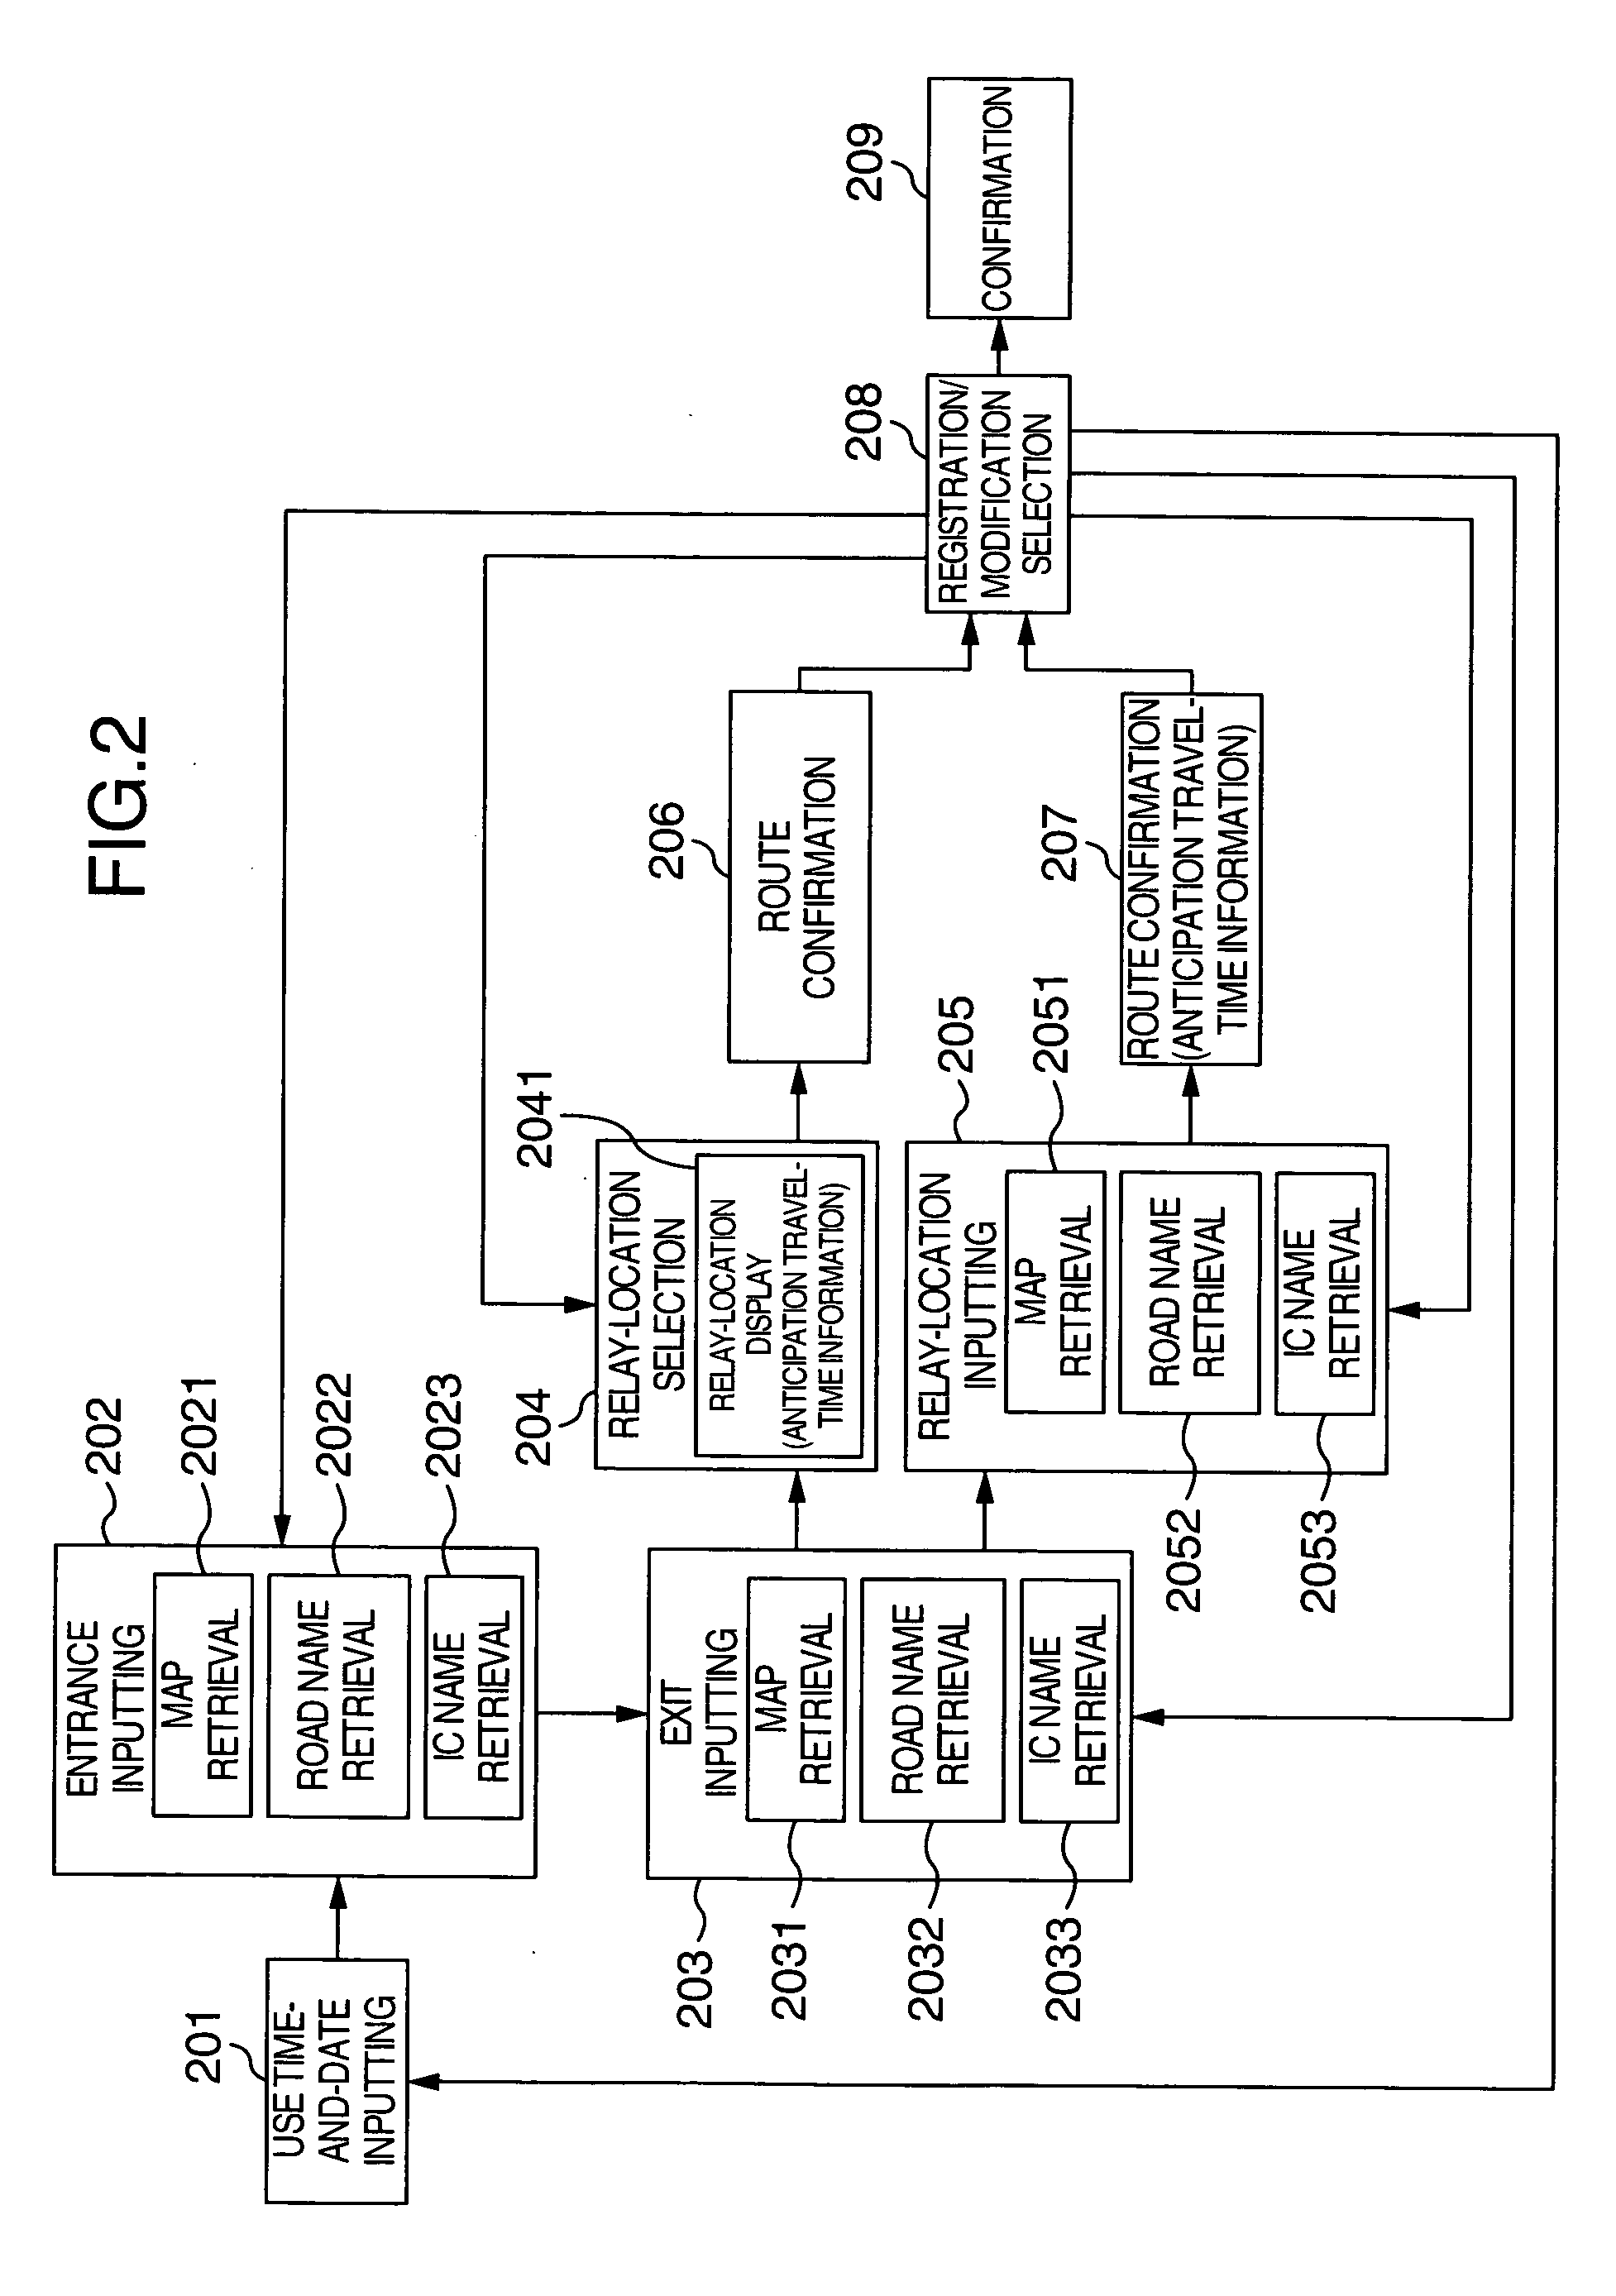 Traffic information providing method and system therefor, and payment method for toll road fee